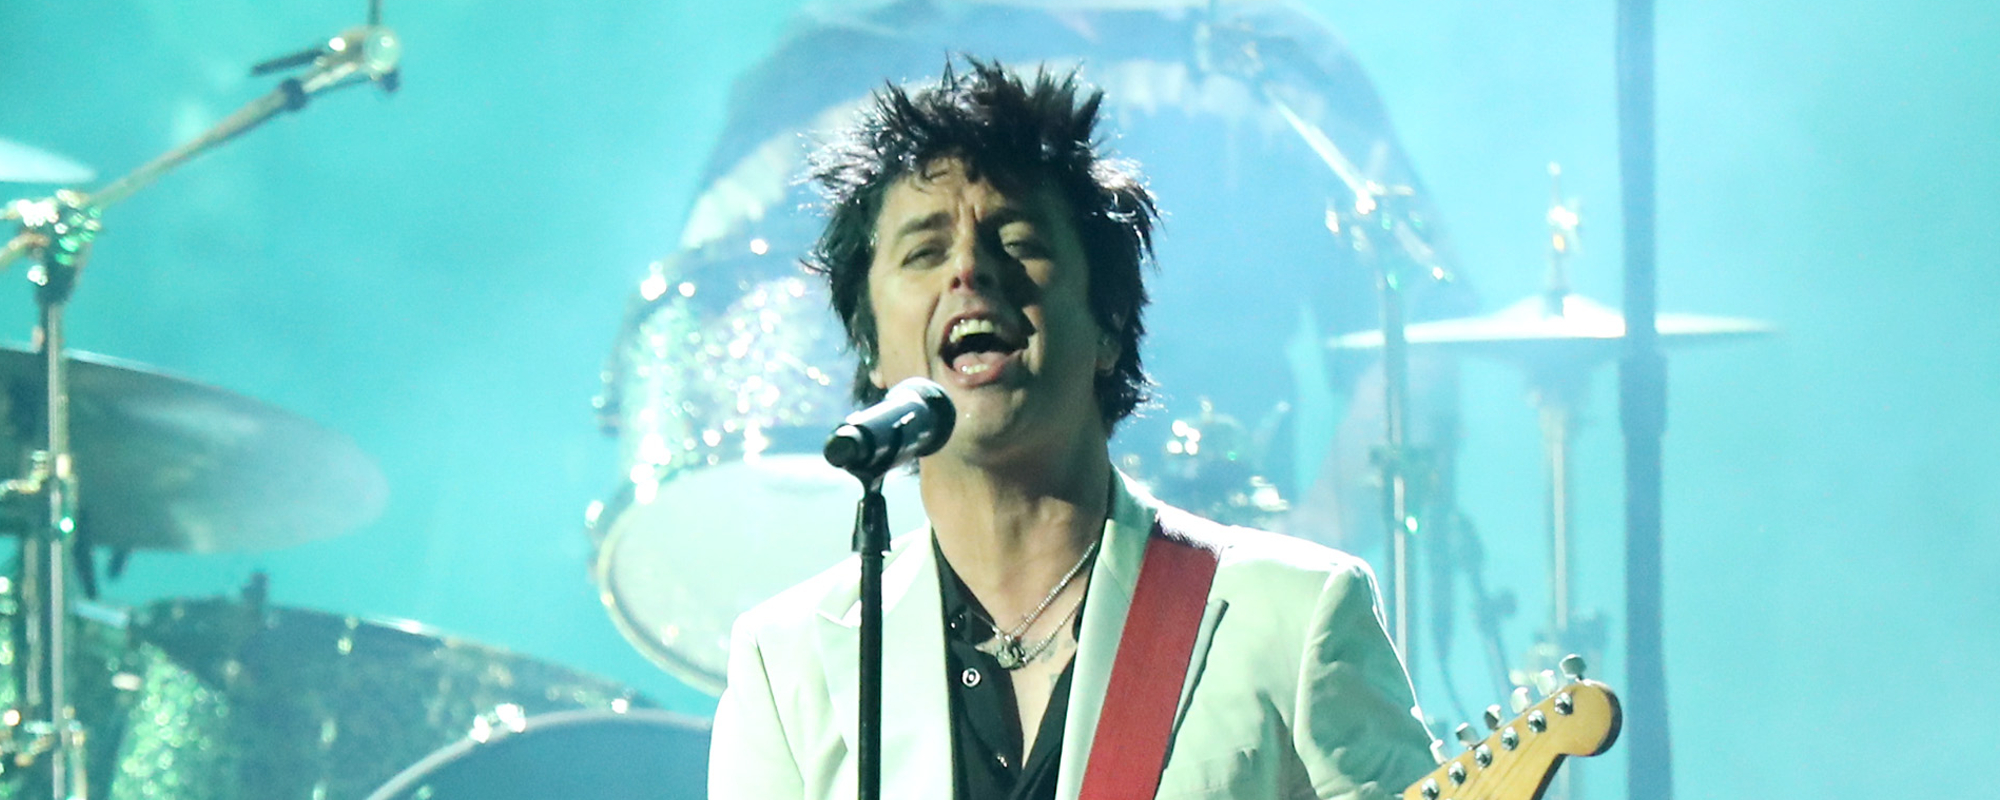 Green Day’s Billie Joe Armstrong Gets Honest About His Battle With Alcohol and How Stage Fright Played a Factor